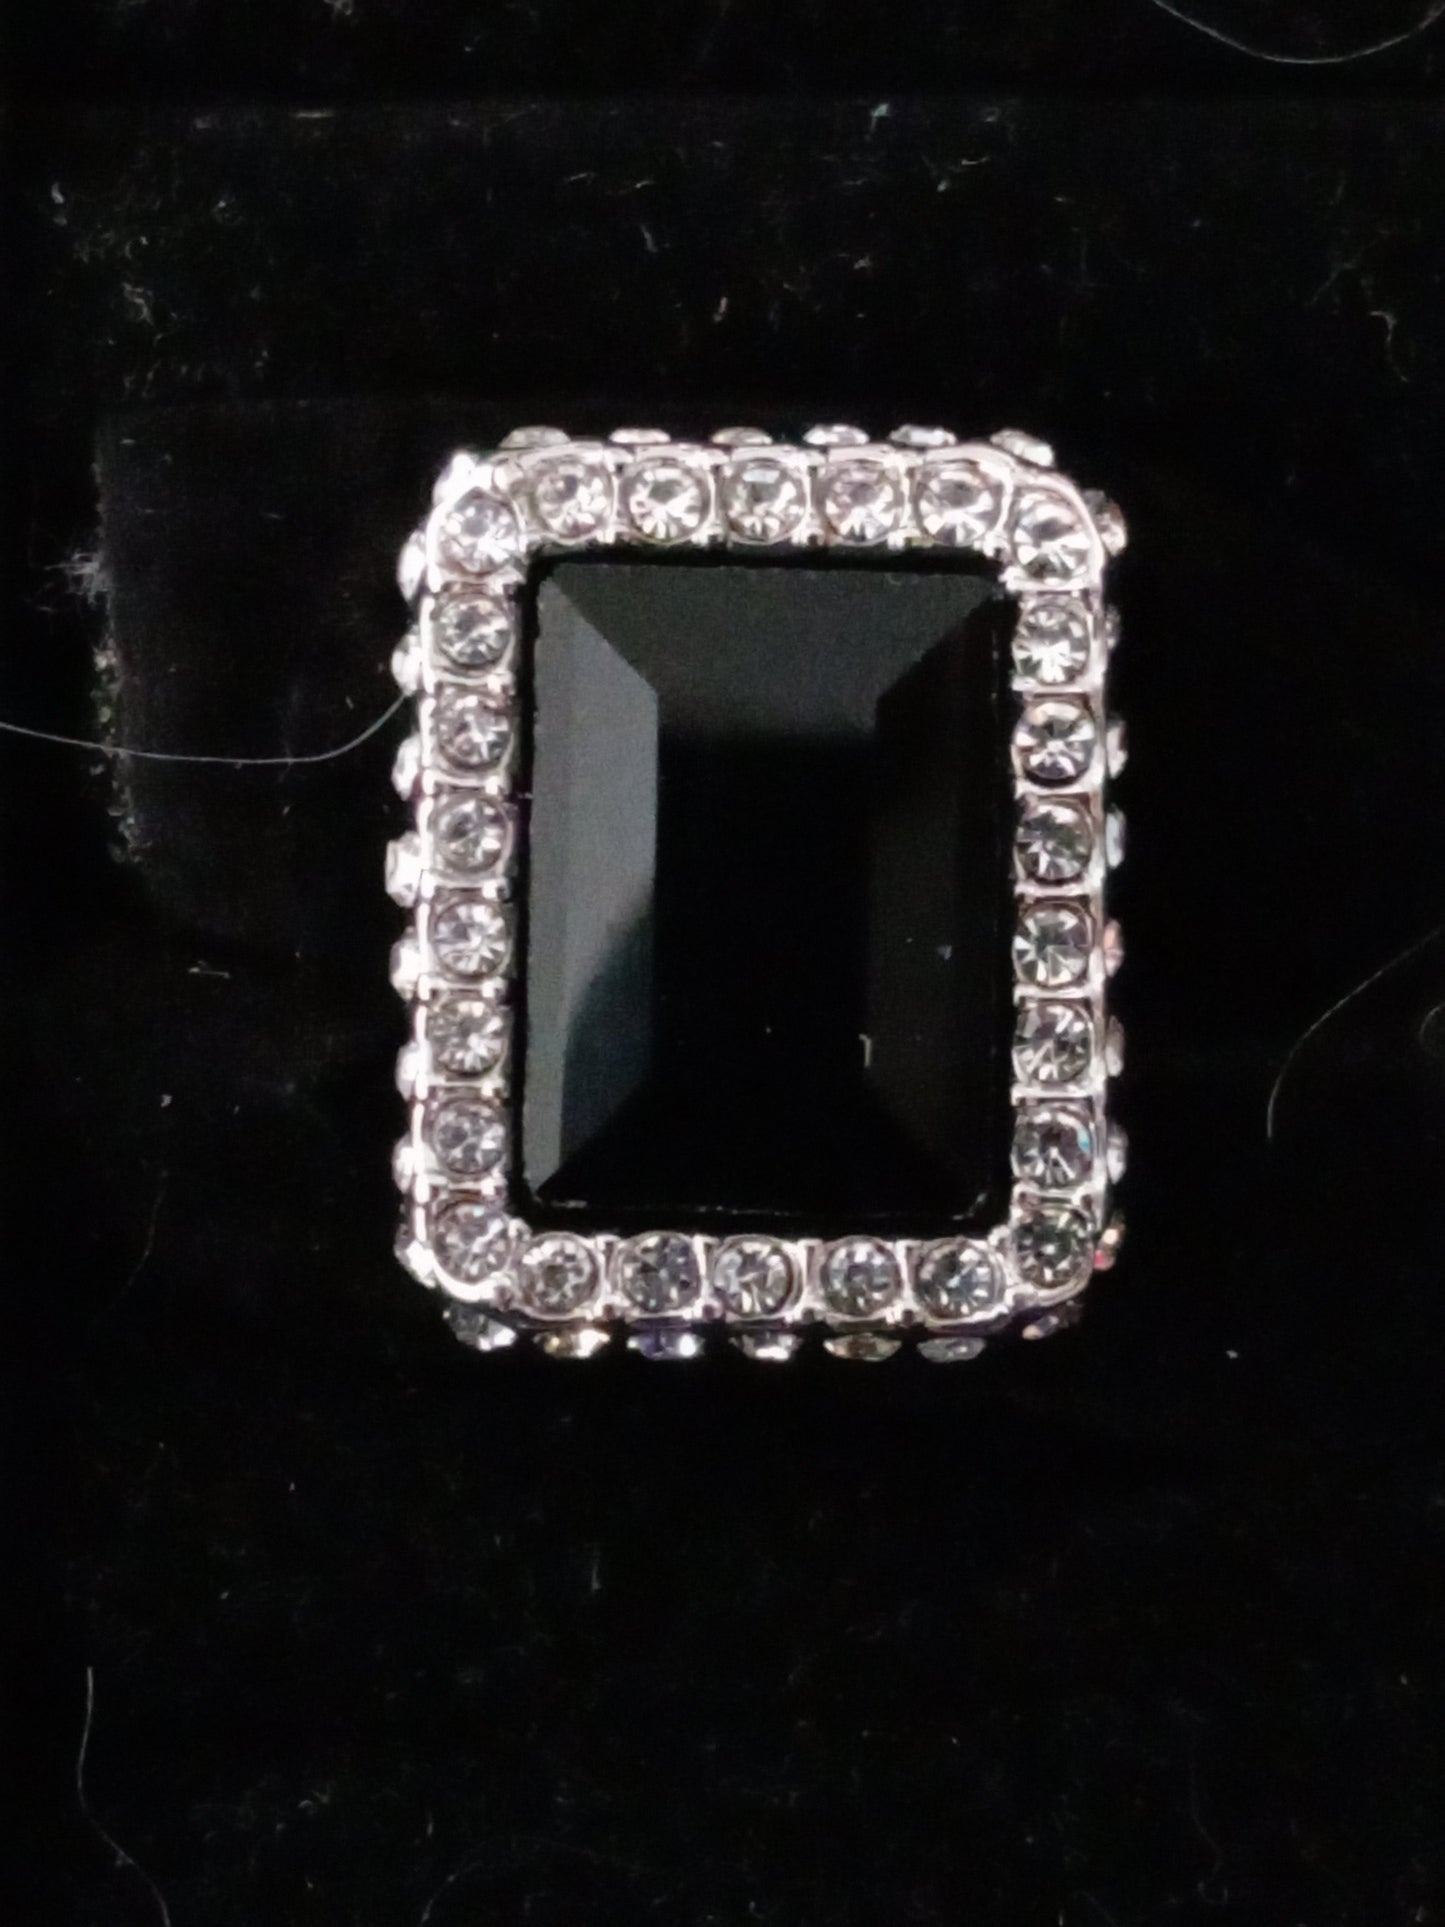 Square Black Onyx and Silver Ring